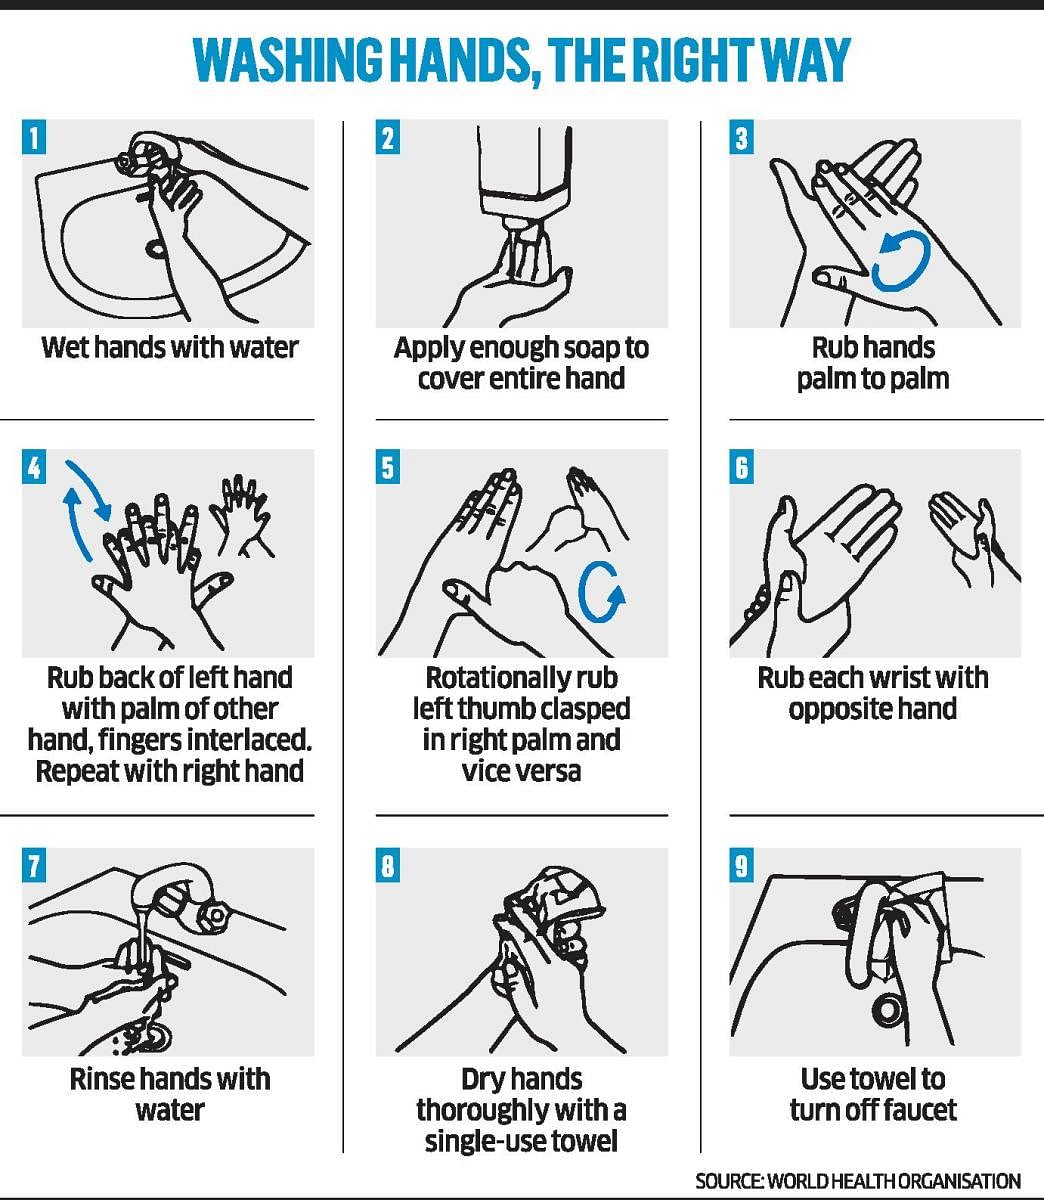 Washing hands, the right way